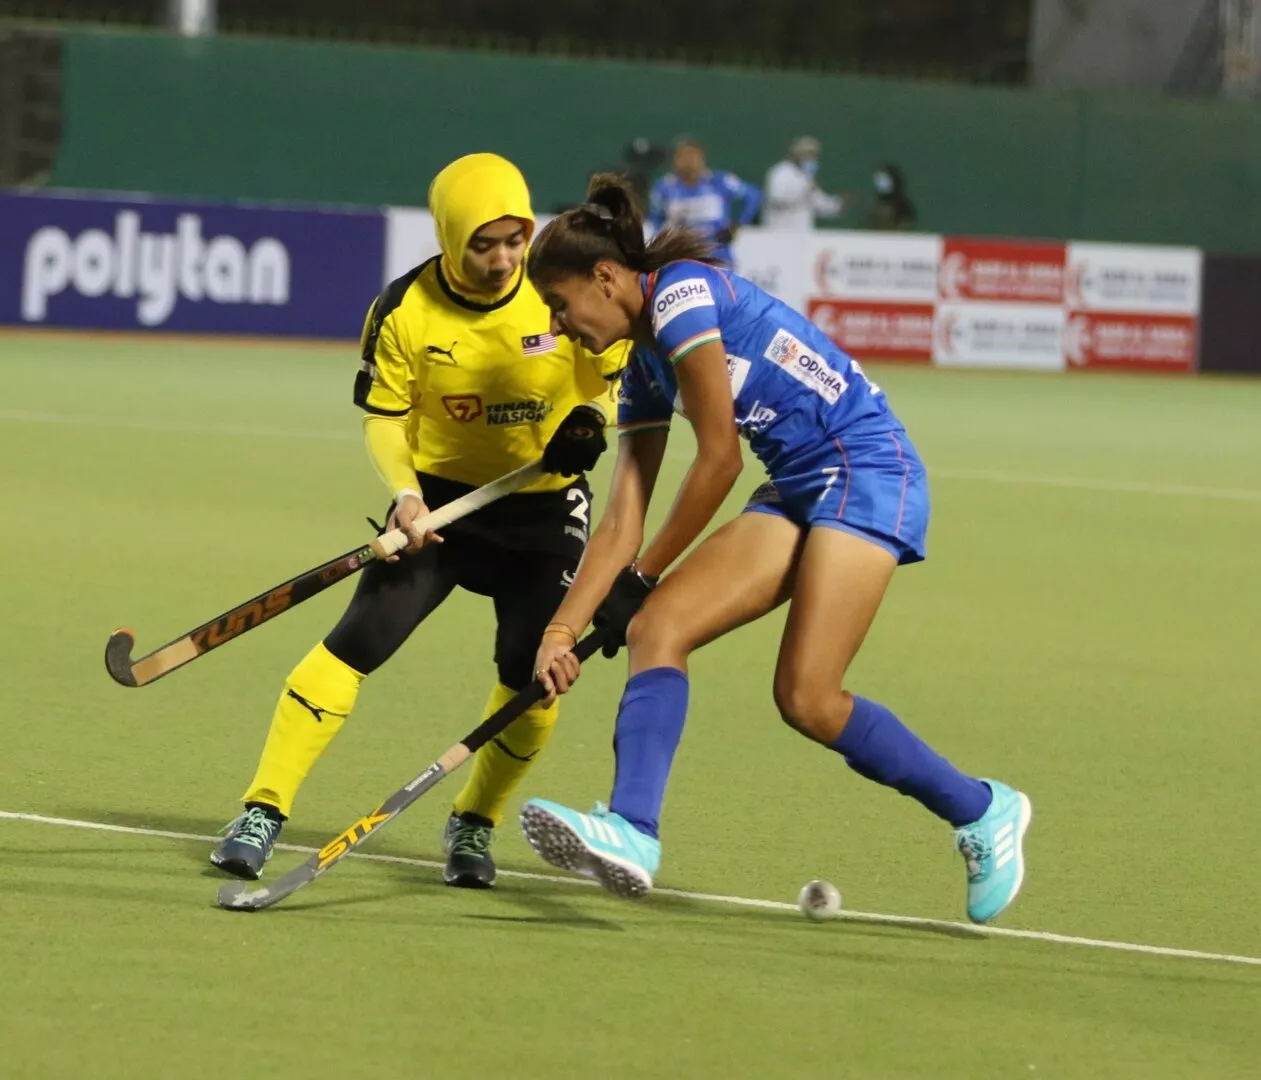 Women's hockey Asia Cup